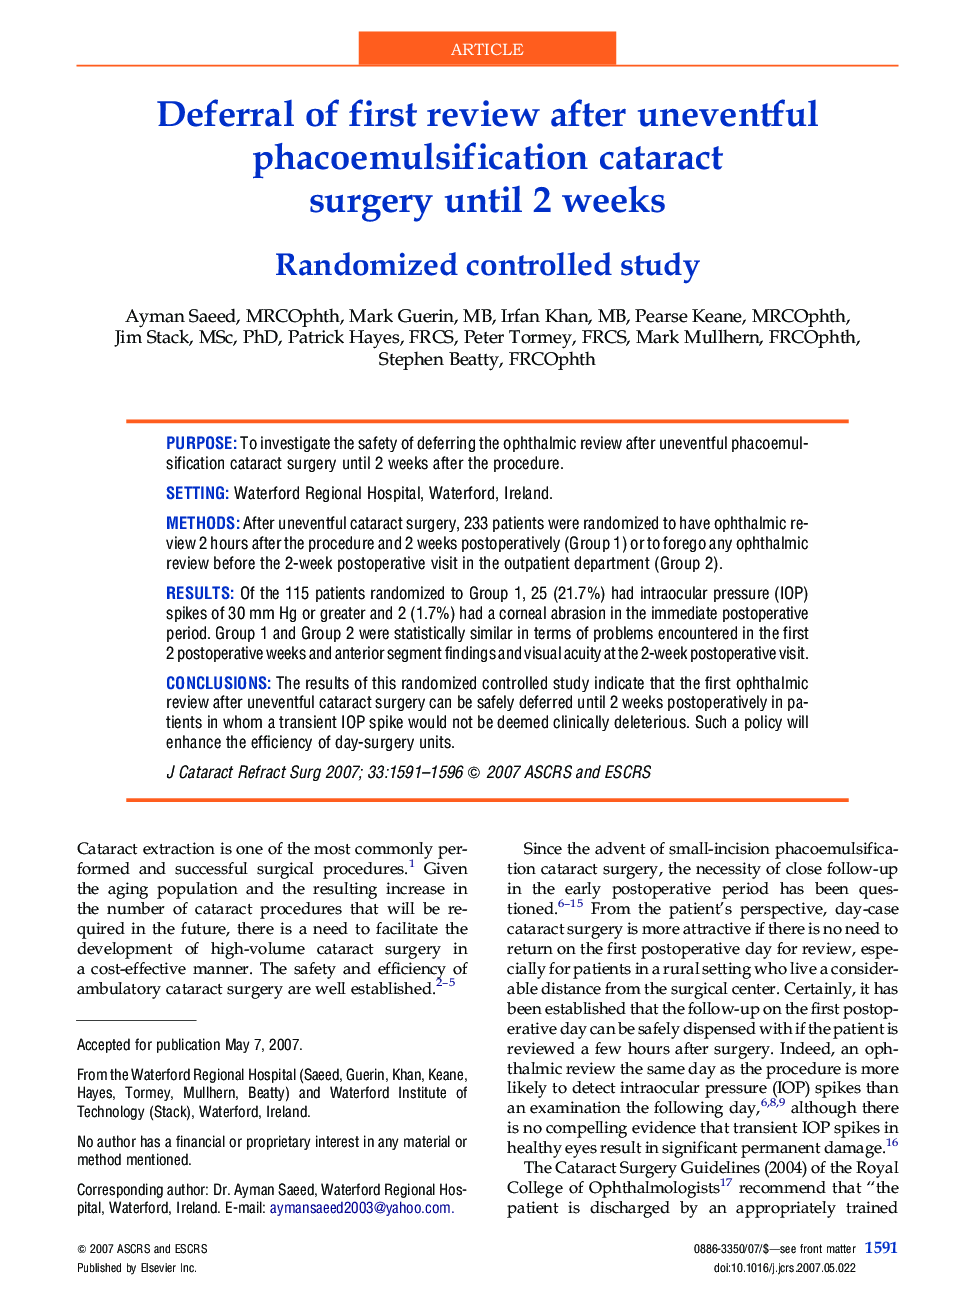 Deferral of first review after uneventful phacoemulsification cataract surgery until 2 weeks : Randomized controlled study